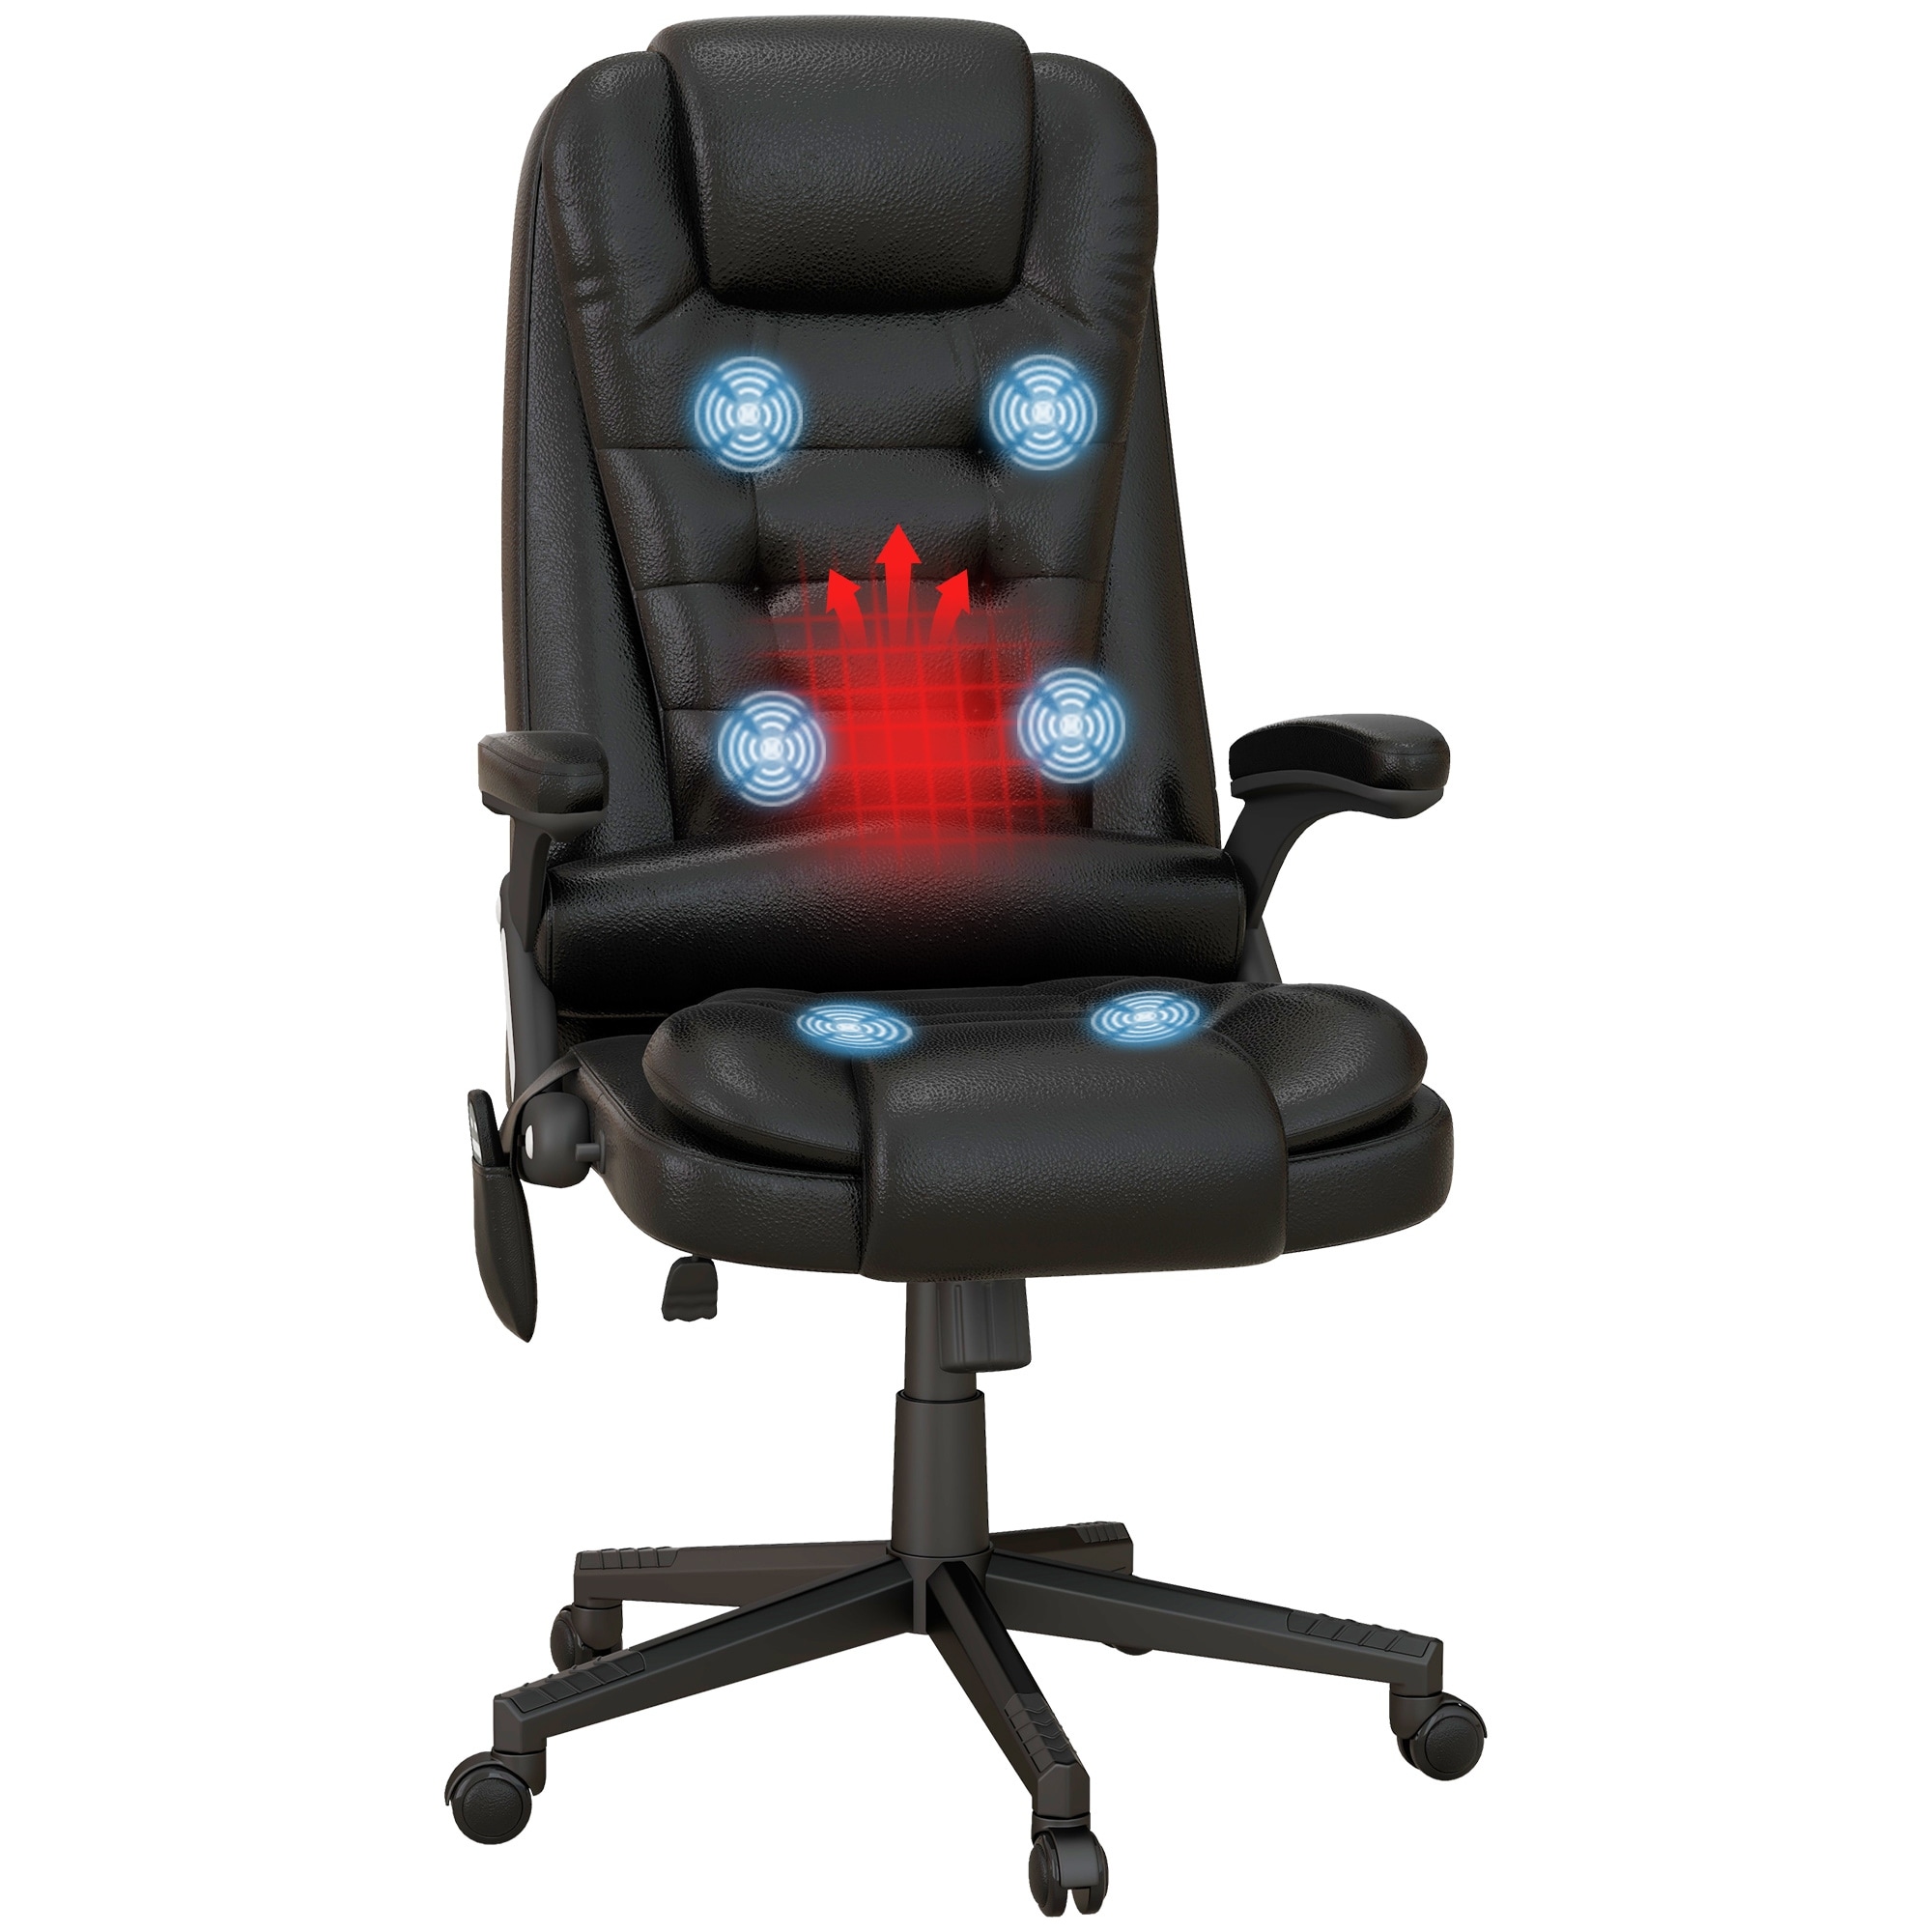 https://ak1.ostkcdn.com/images/products/is/images/direct/0162d34007ce00672574767a121b833417484eee/HomCom-High-Back-Executive-Massage-Office-Chair-Faux-Leather-Heated-Reclining-Desk-Chair-with-6-Point-Vibration.jpg